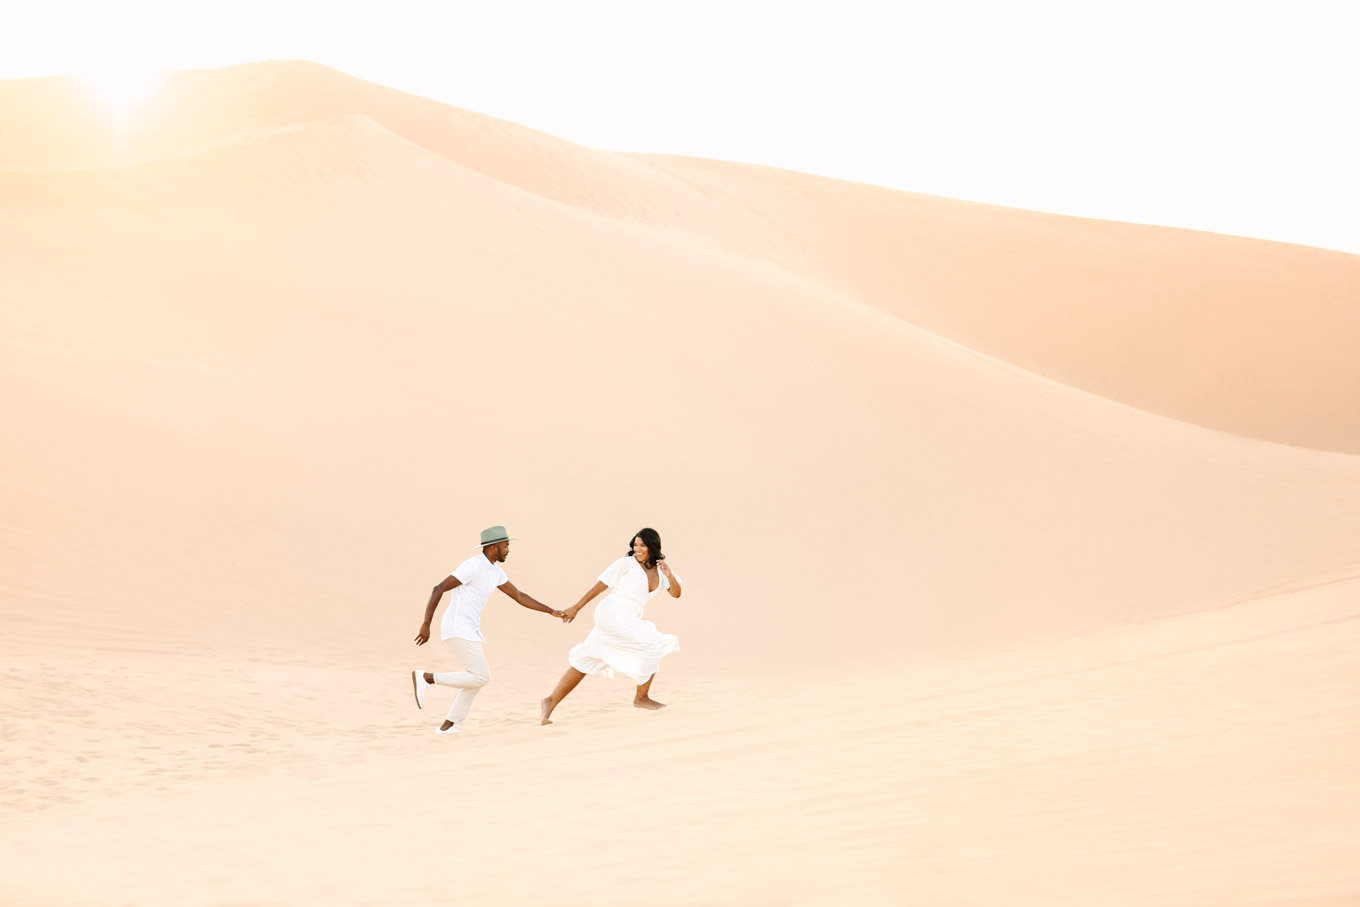 Couple running in the sand dunes | | California Sand Dunes engagement session | Colorful Palm Springs wedding photography | #palmspringsphotographer #sanddunes #engagementsession #southerncalifornia  Source: Mary Costa Photography | Los Angeles